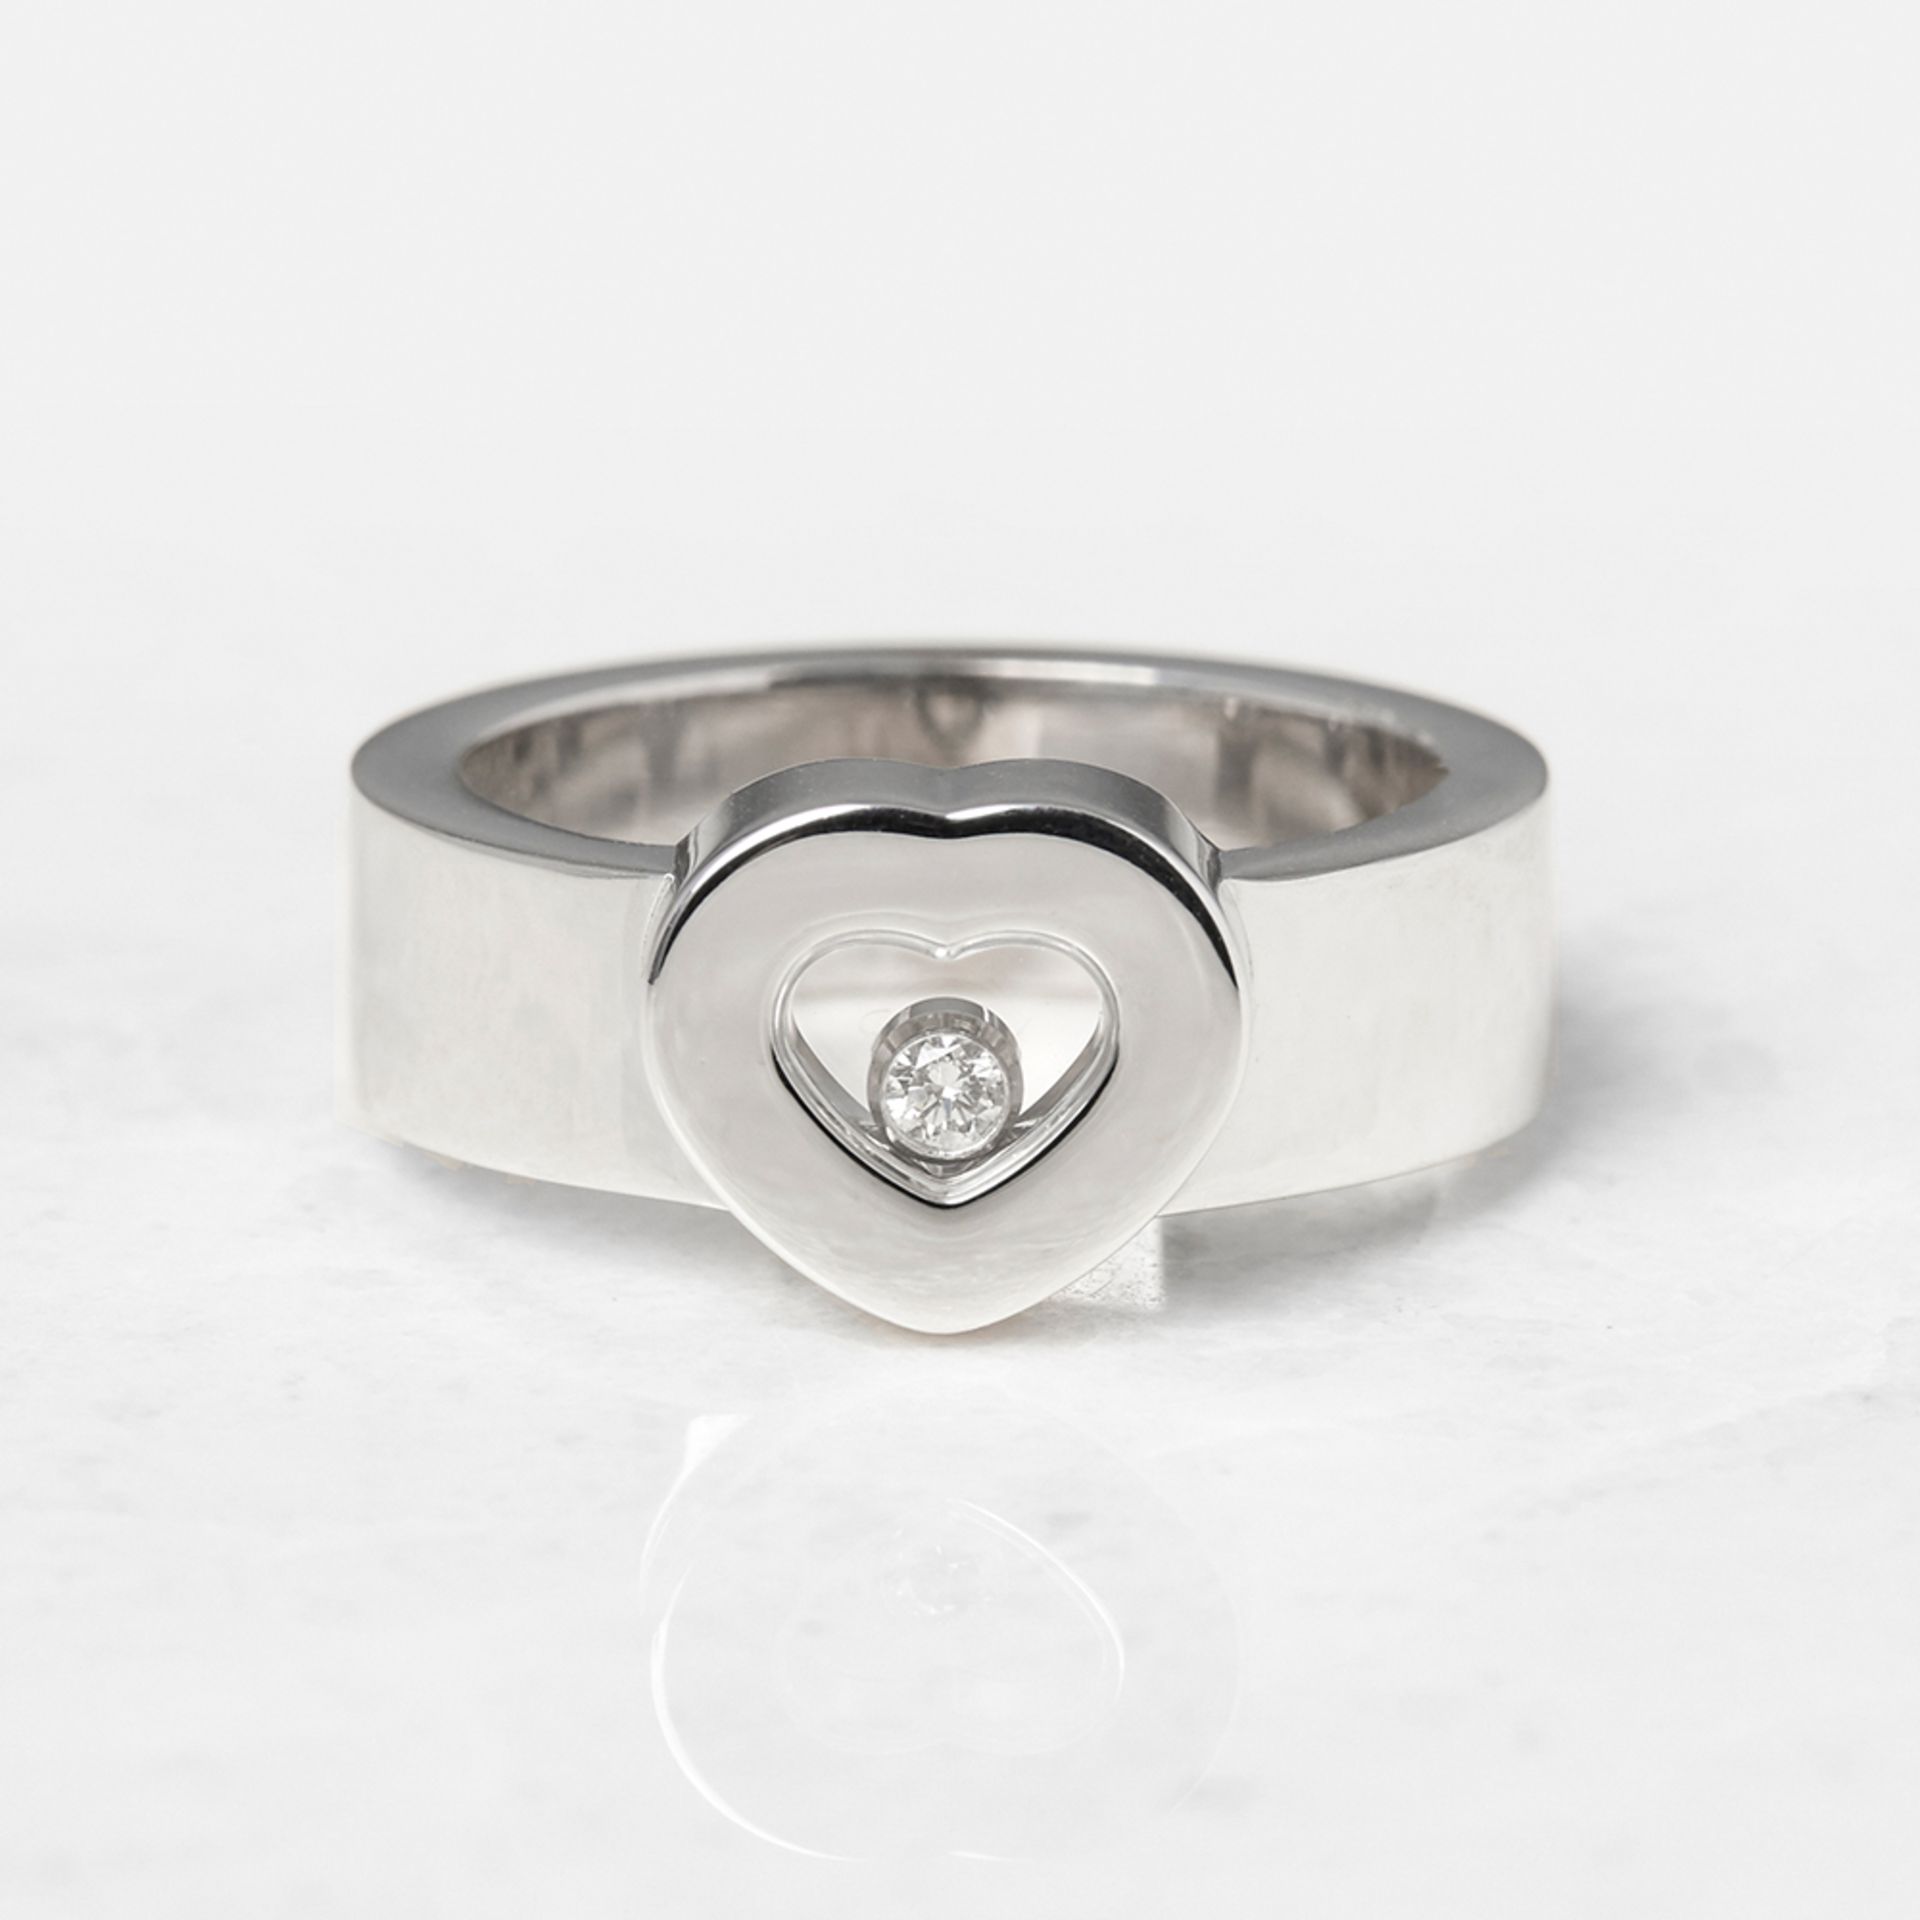 Chopard 18k White Gold Heart Happy Diamonds Ring Size M - Image 2 of 5